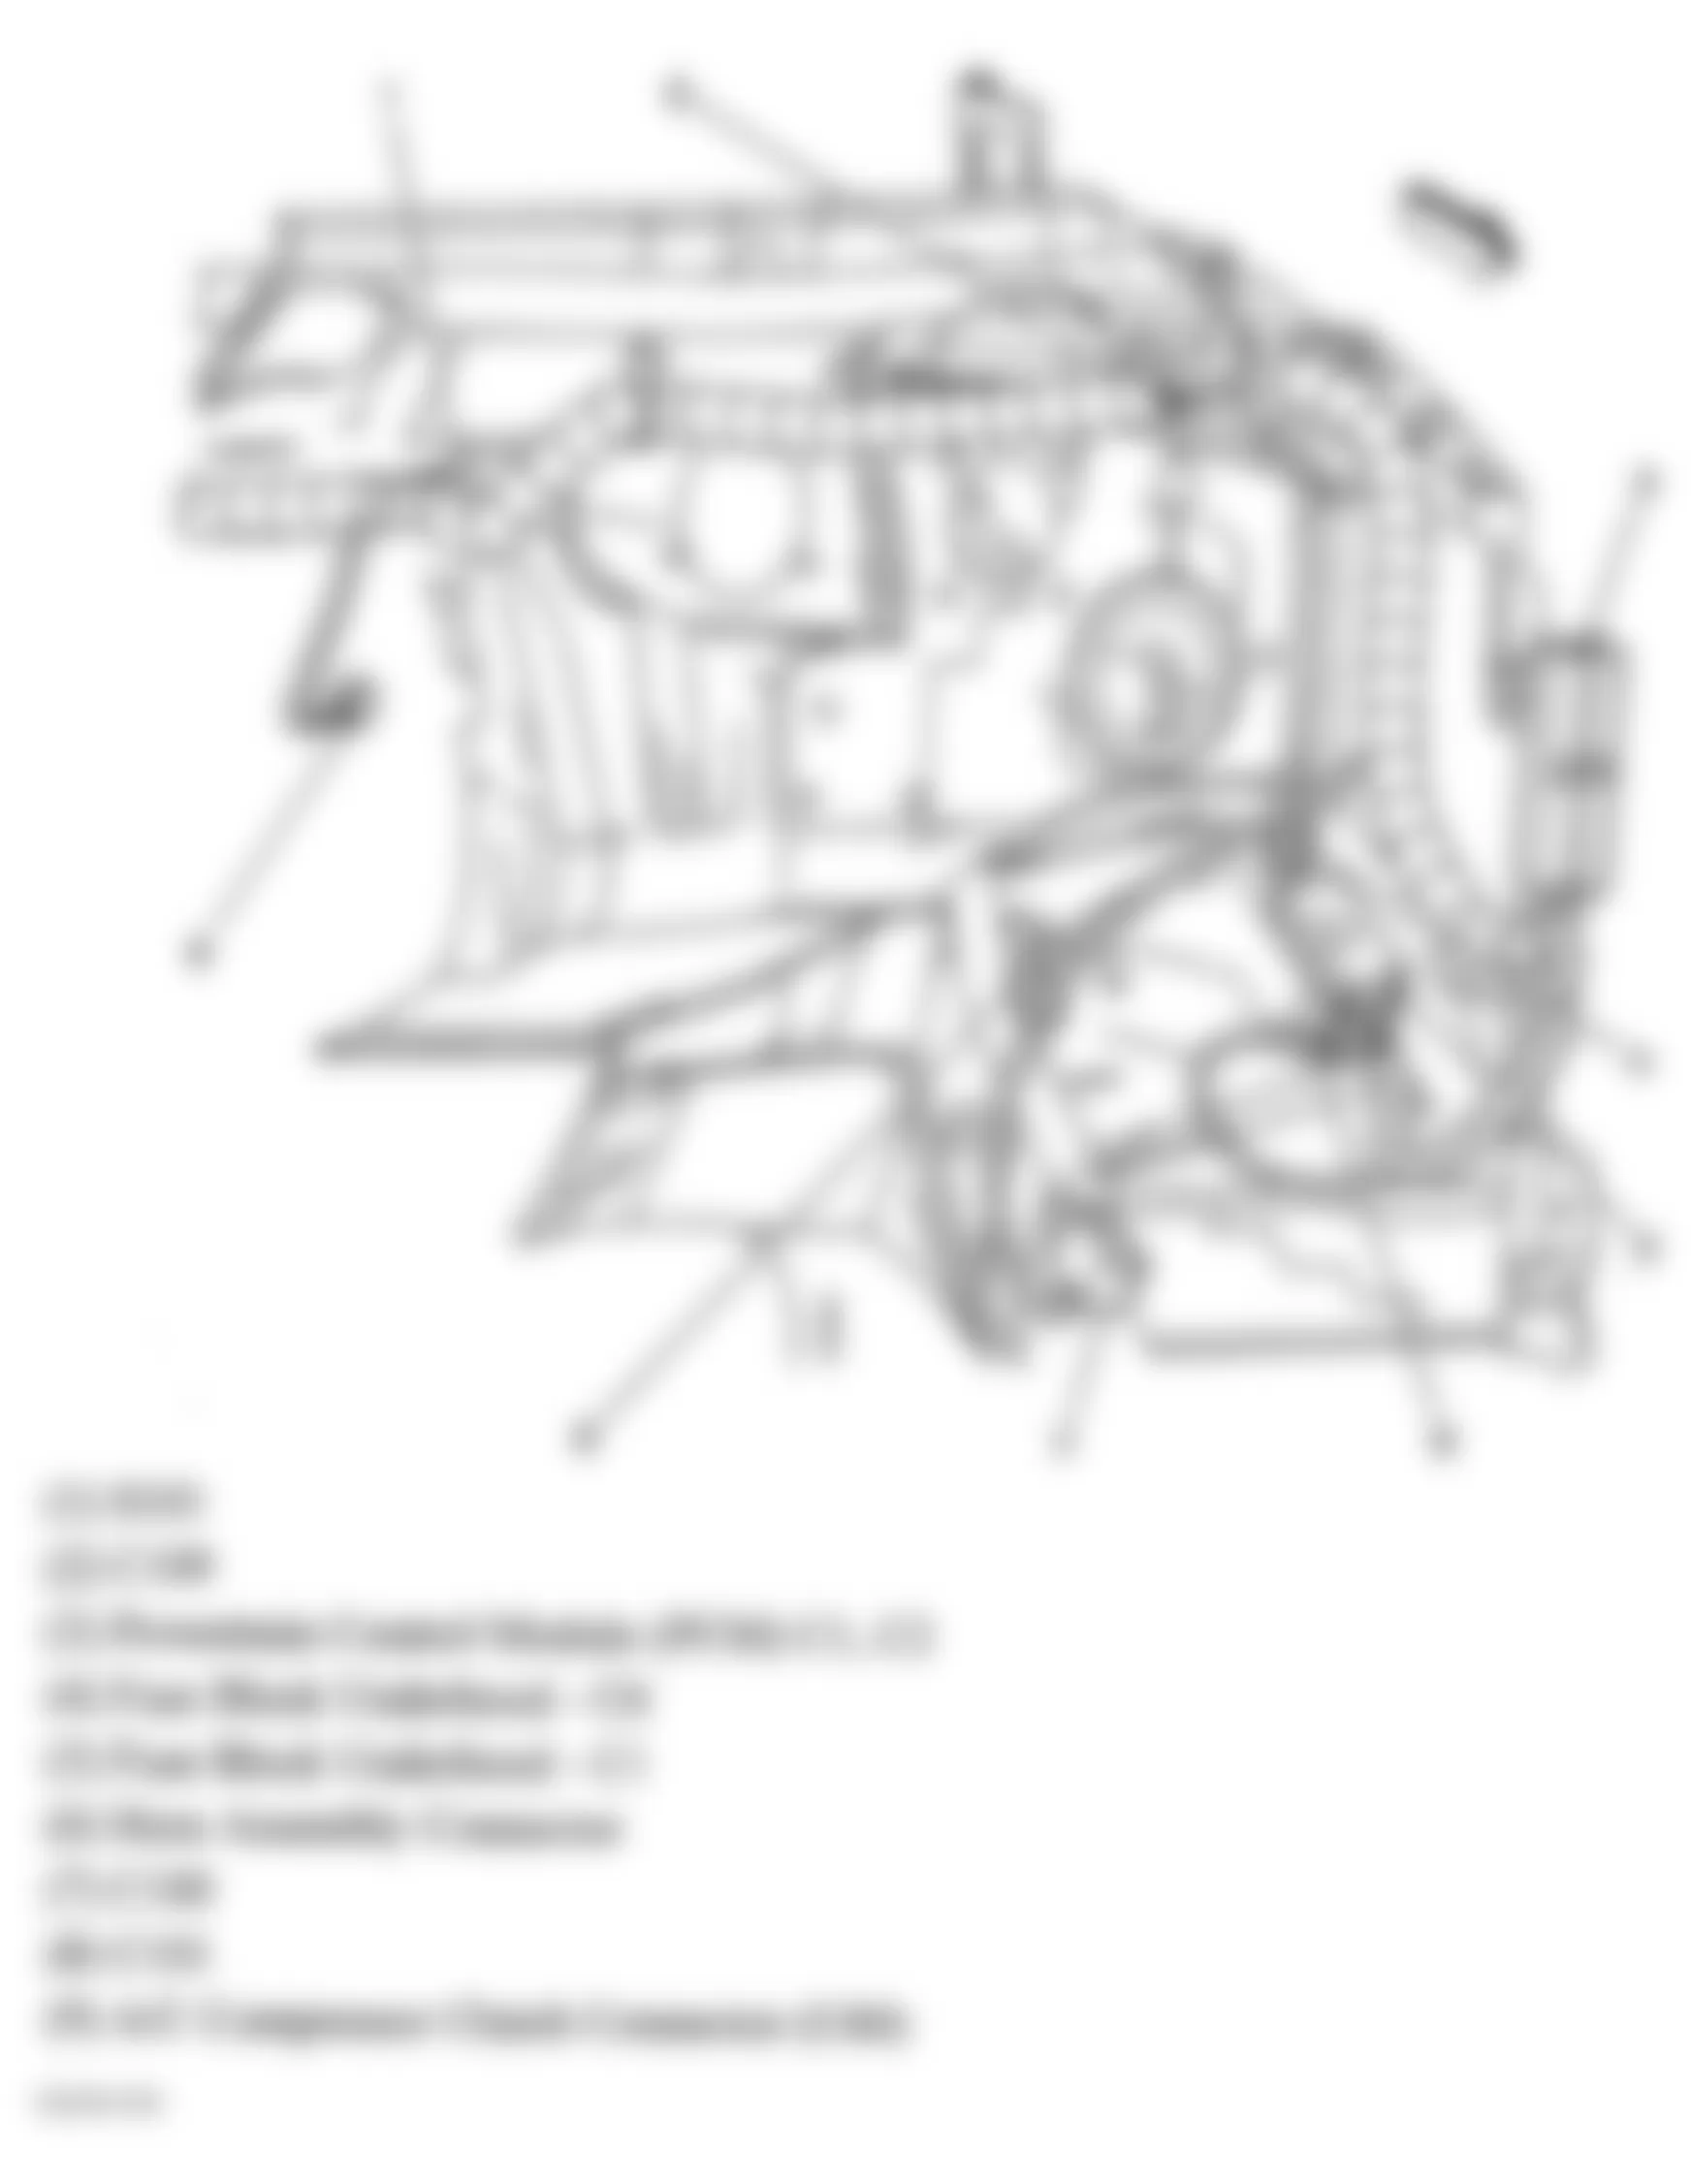 GMC Savana Special G3500 2004 - Component Locations -  Left Rear Of Engine Compartment